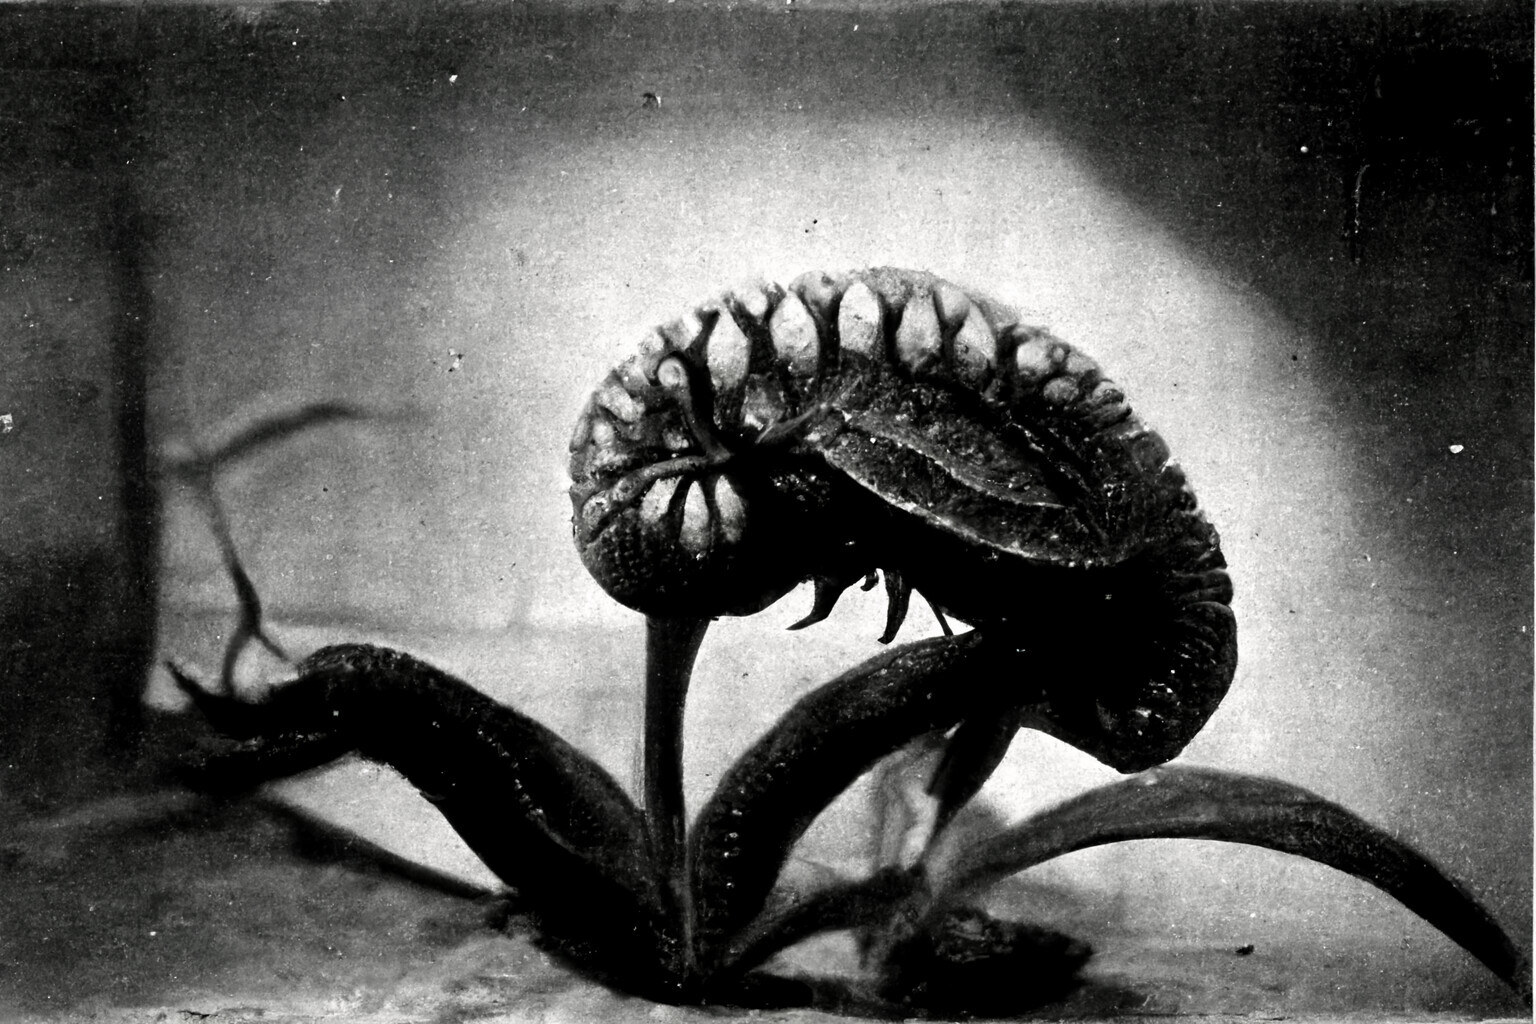 Ripe Lime Dragon
c. 1881
Photograph
'This was originally a bell pepper plant'